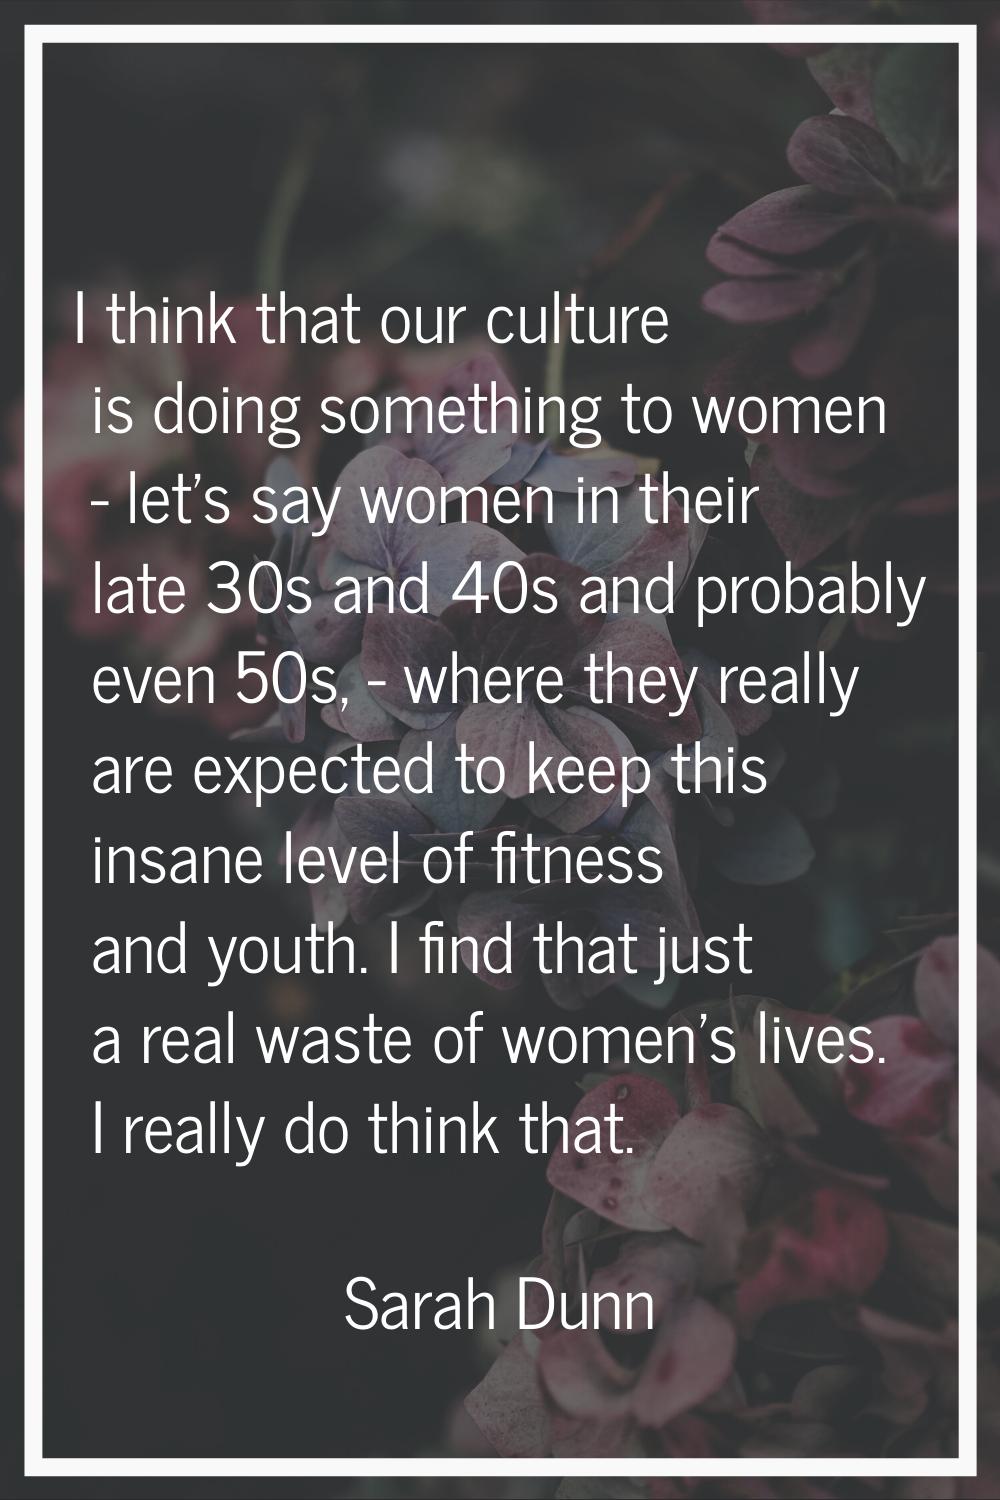 I think that our culture is doing something to women - let's say women in their late 30s and 40s an